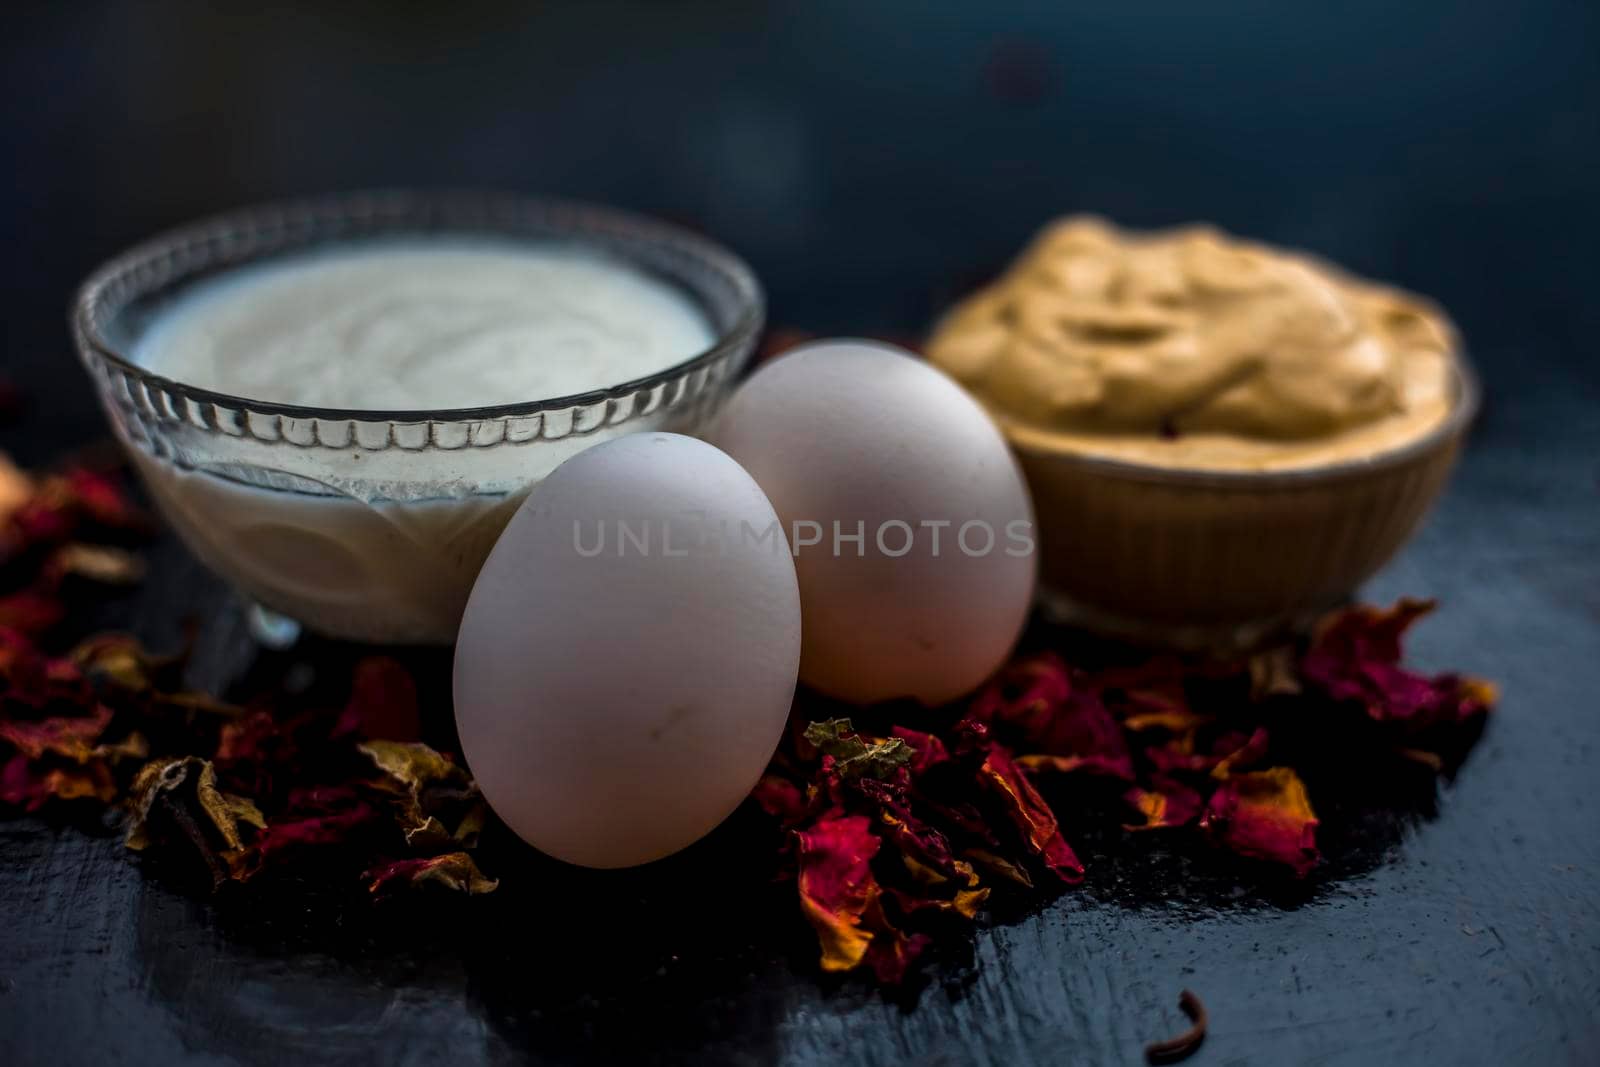 Best DIY face mask of multani mitti or mulpani mitti along with egg white and some yogurt well mixed in a glass bowl on the black wooden surface for the remedy of even skin.